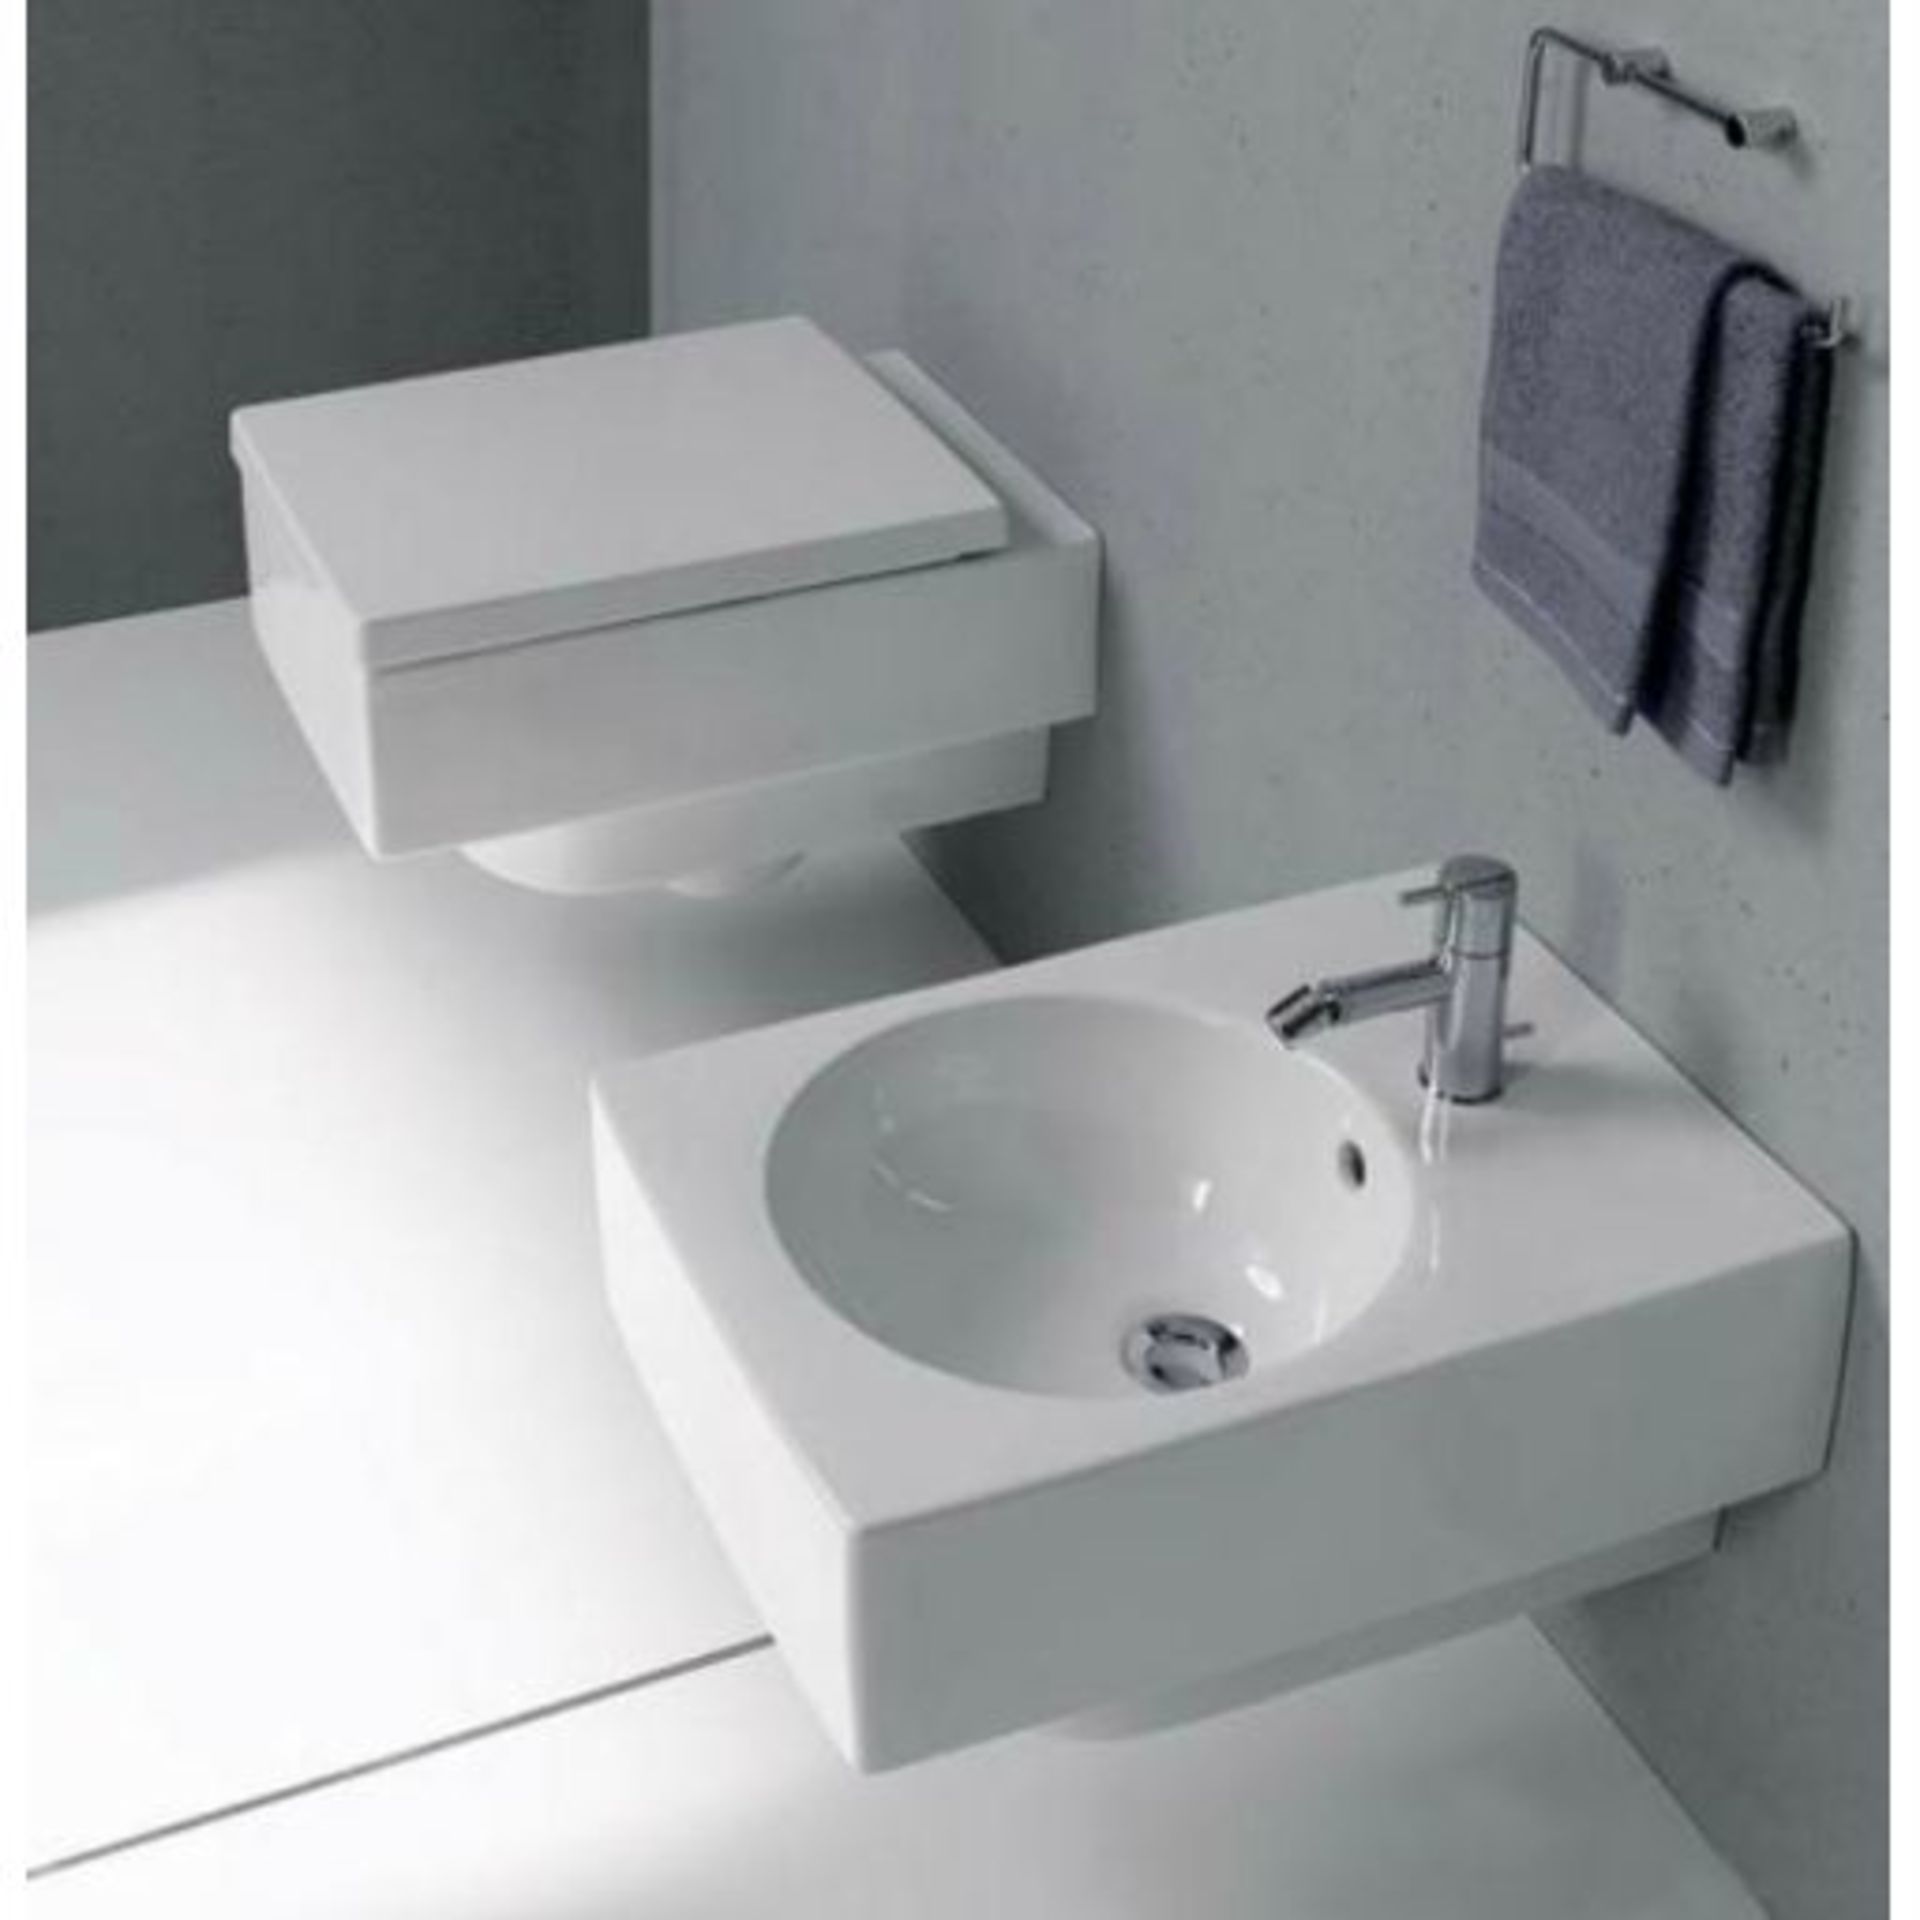 (RR57) Keramag Preciosa - Wash-down WC, 4,5 / 6 l, wall hung Fits effortlessly into even the ...(( - Image 4 of 4